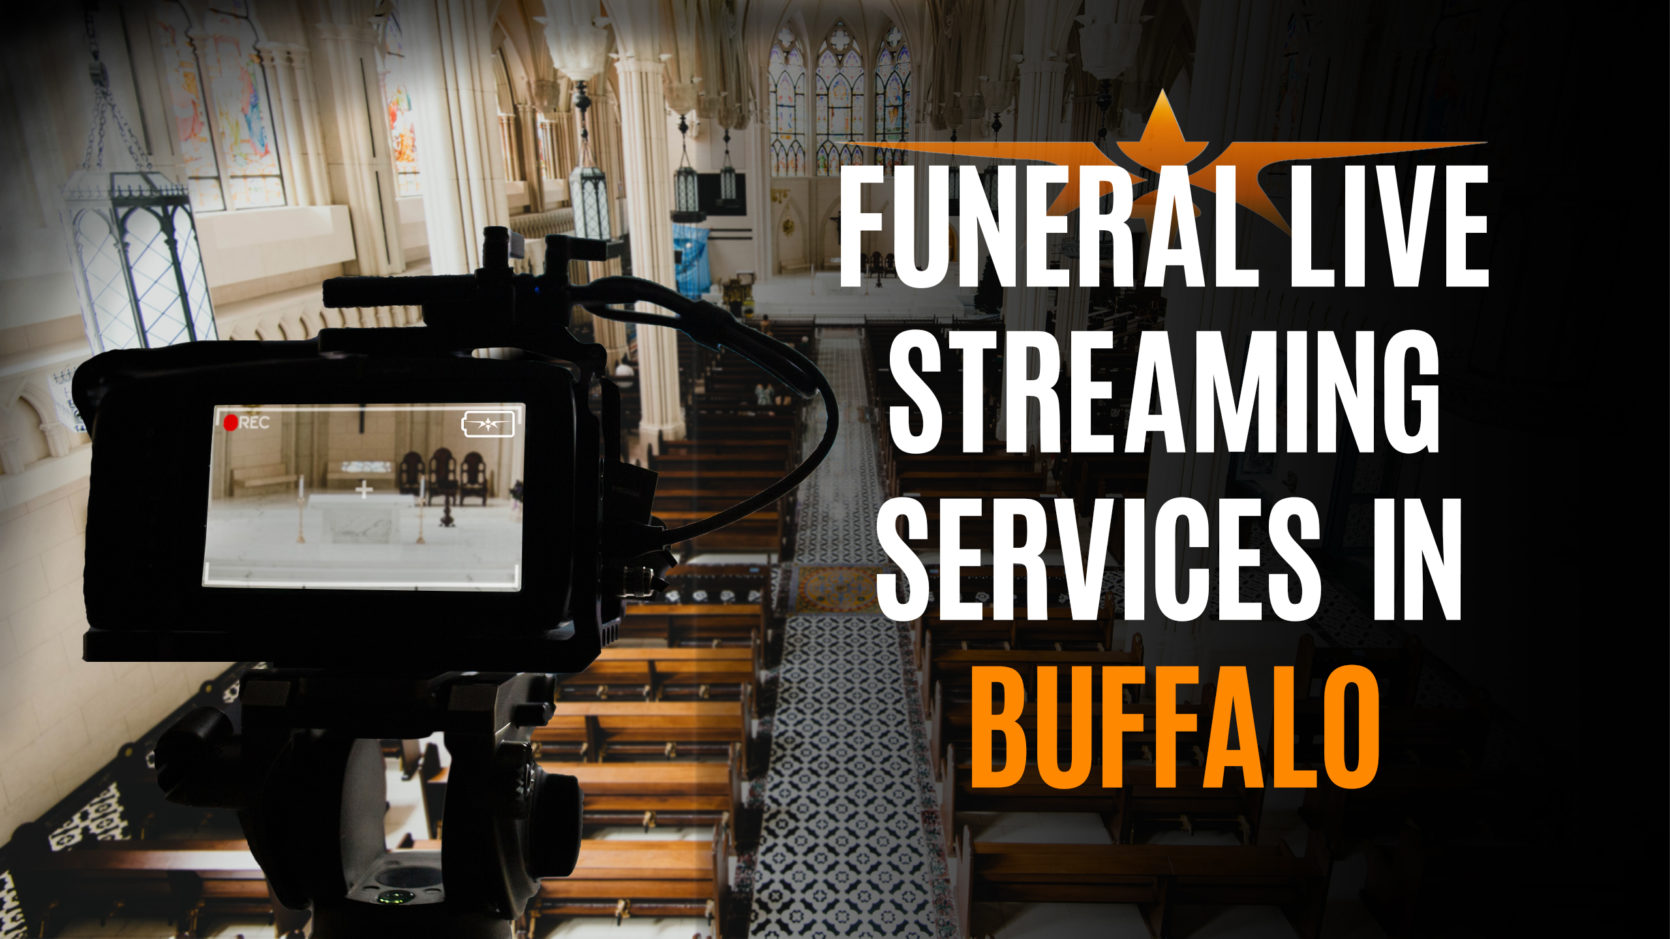 Funeral Live Streaming Services in Buffalo